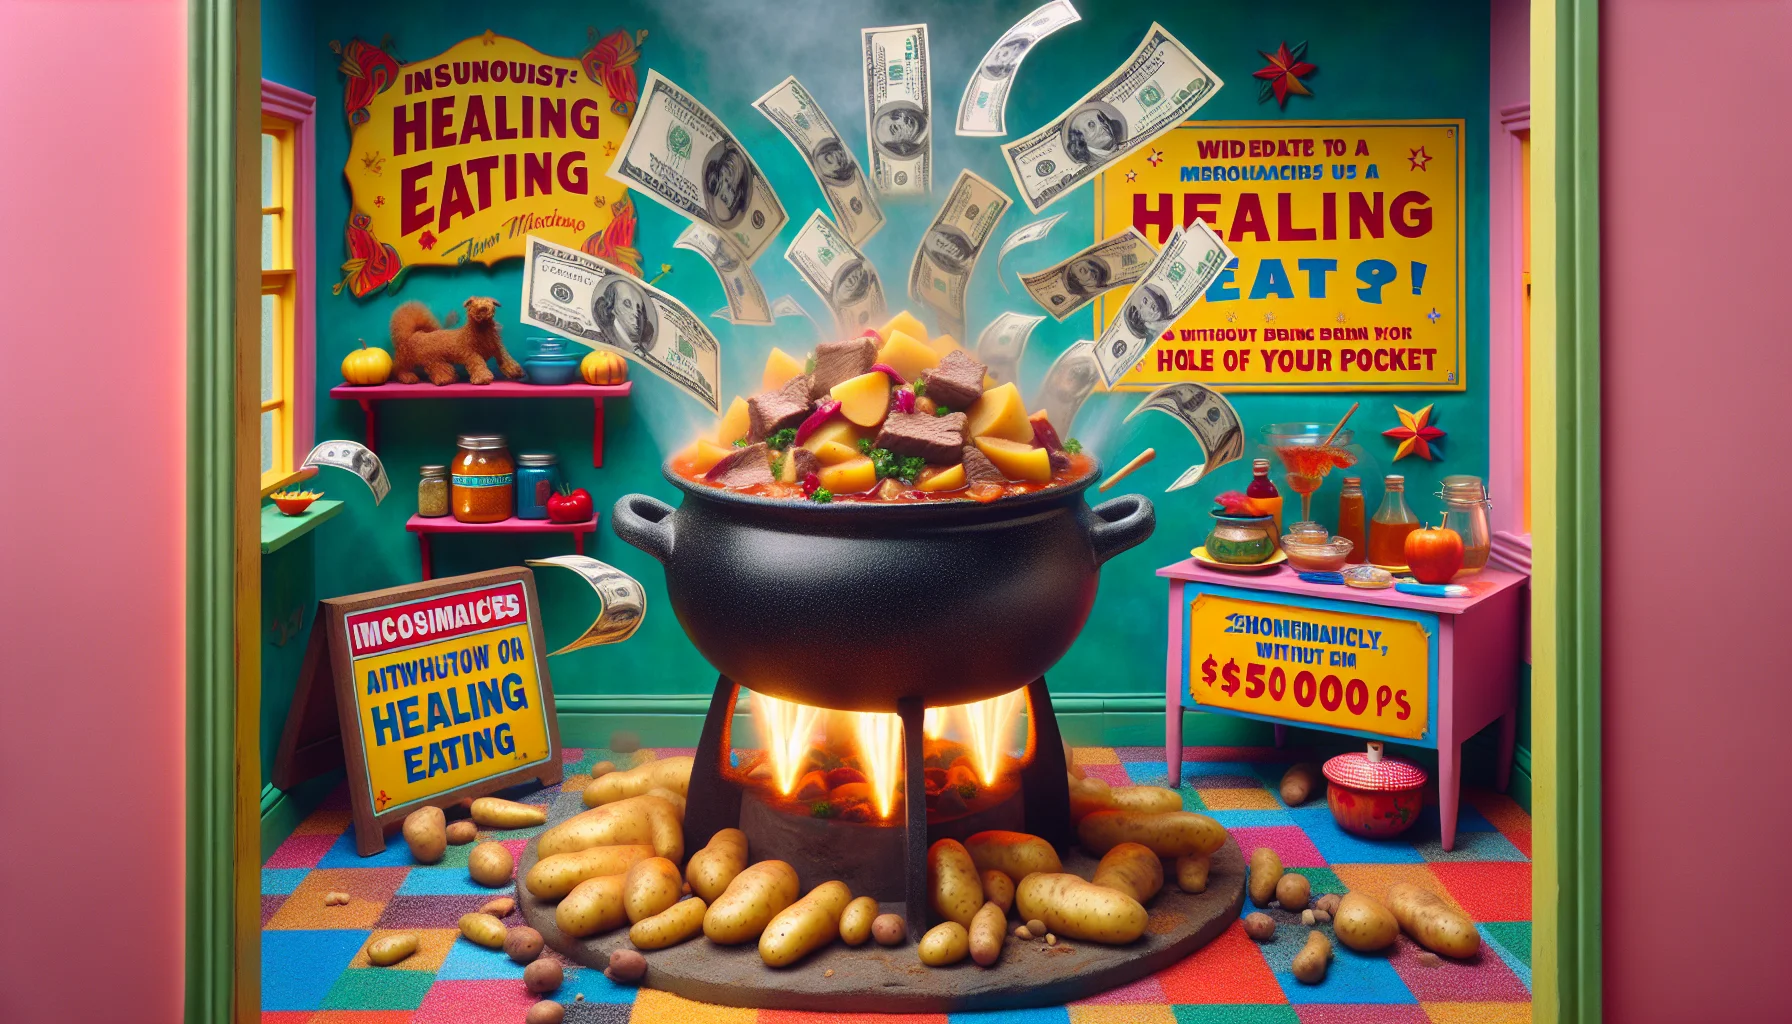 Generate a humorous yet realistic image of a vibrant, delectably prepared beef and potato stew. The scene is taking place within a garishly decorated kitchen where the stew pot inexplicably spurts out occasional dollar bills along with aromas, symbolizing the economical benefits of healing eating. Beside the unusual spectacle, there is a creatively designed promotional board encouraging people to adopt a healthier diet without burning a hole in their pocket.